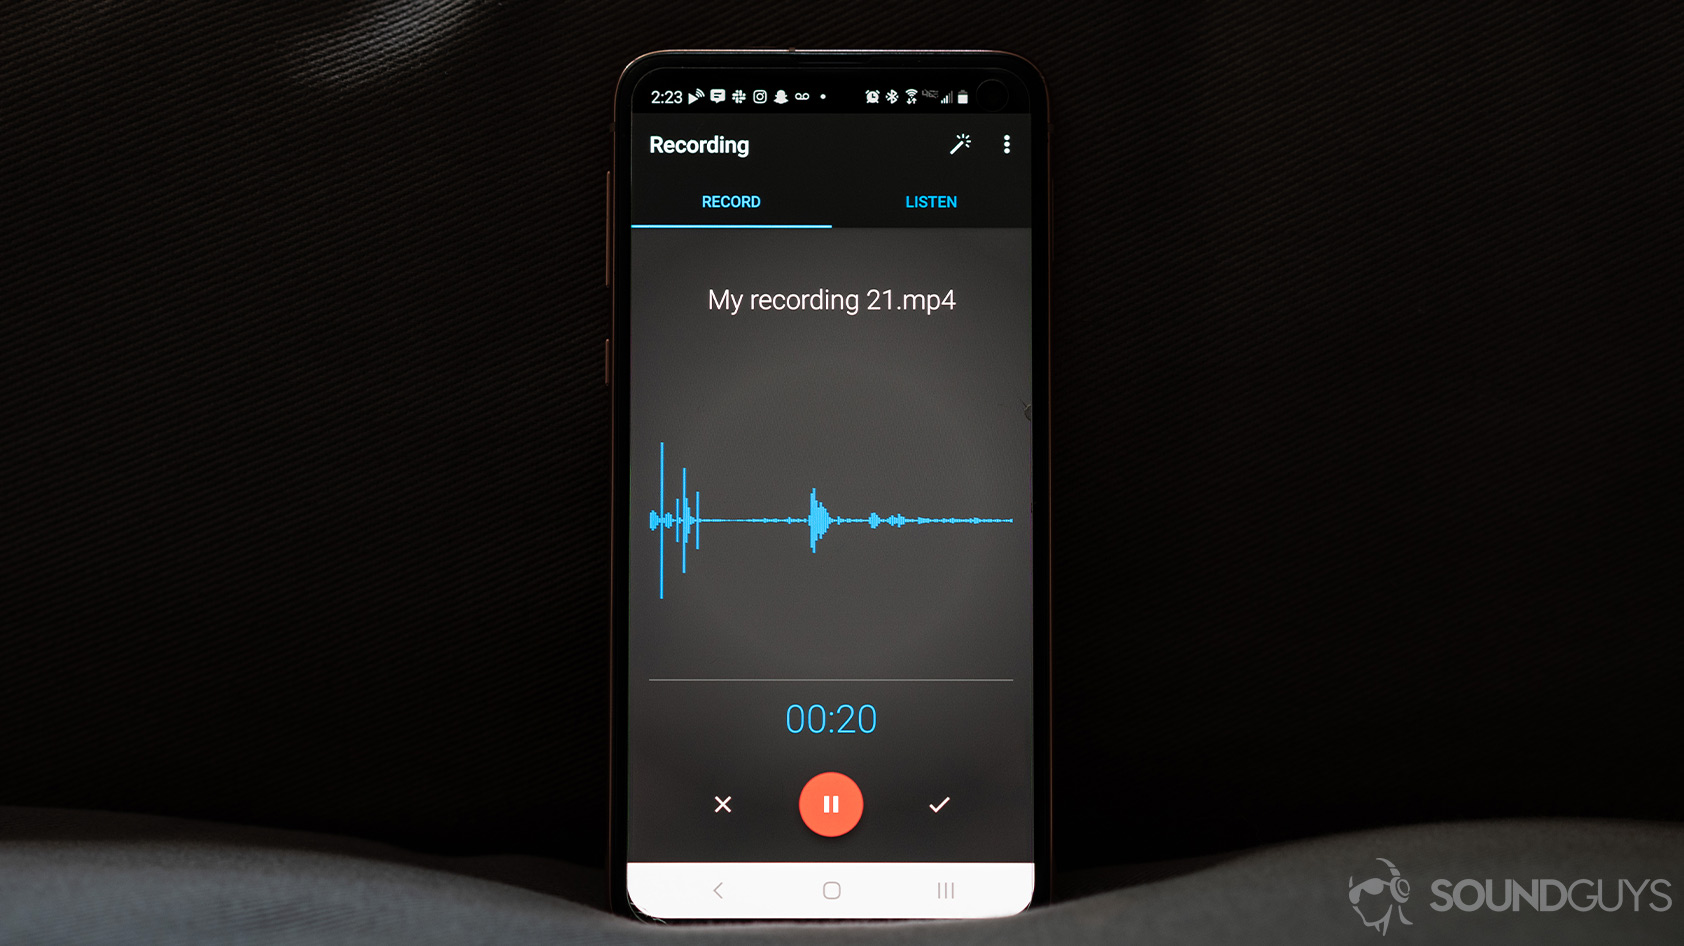 voice recorder app that converts to text